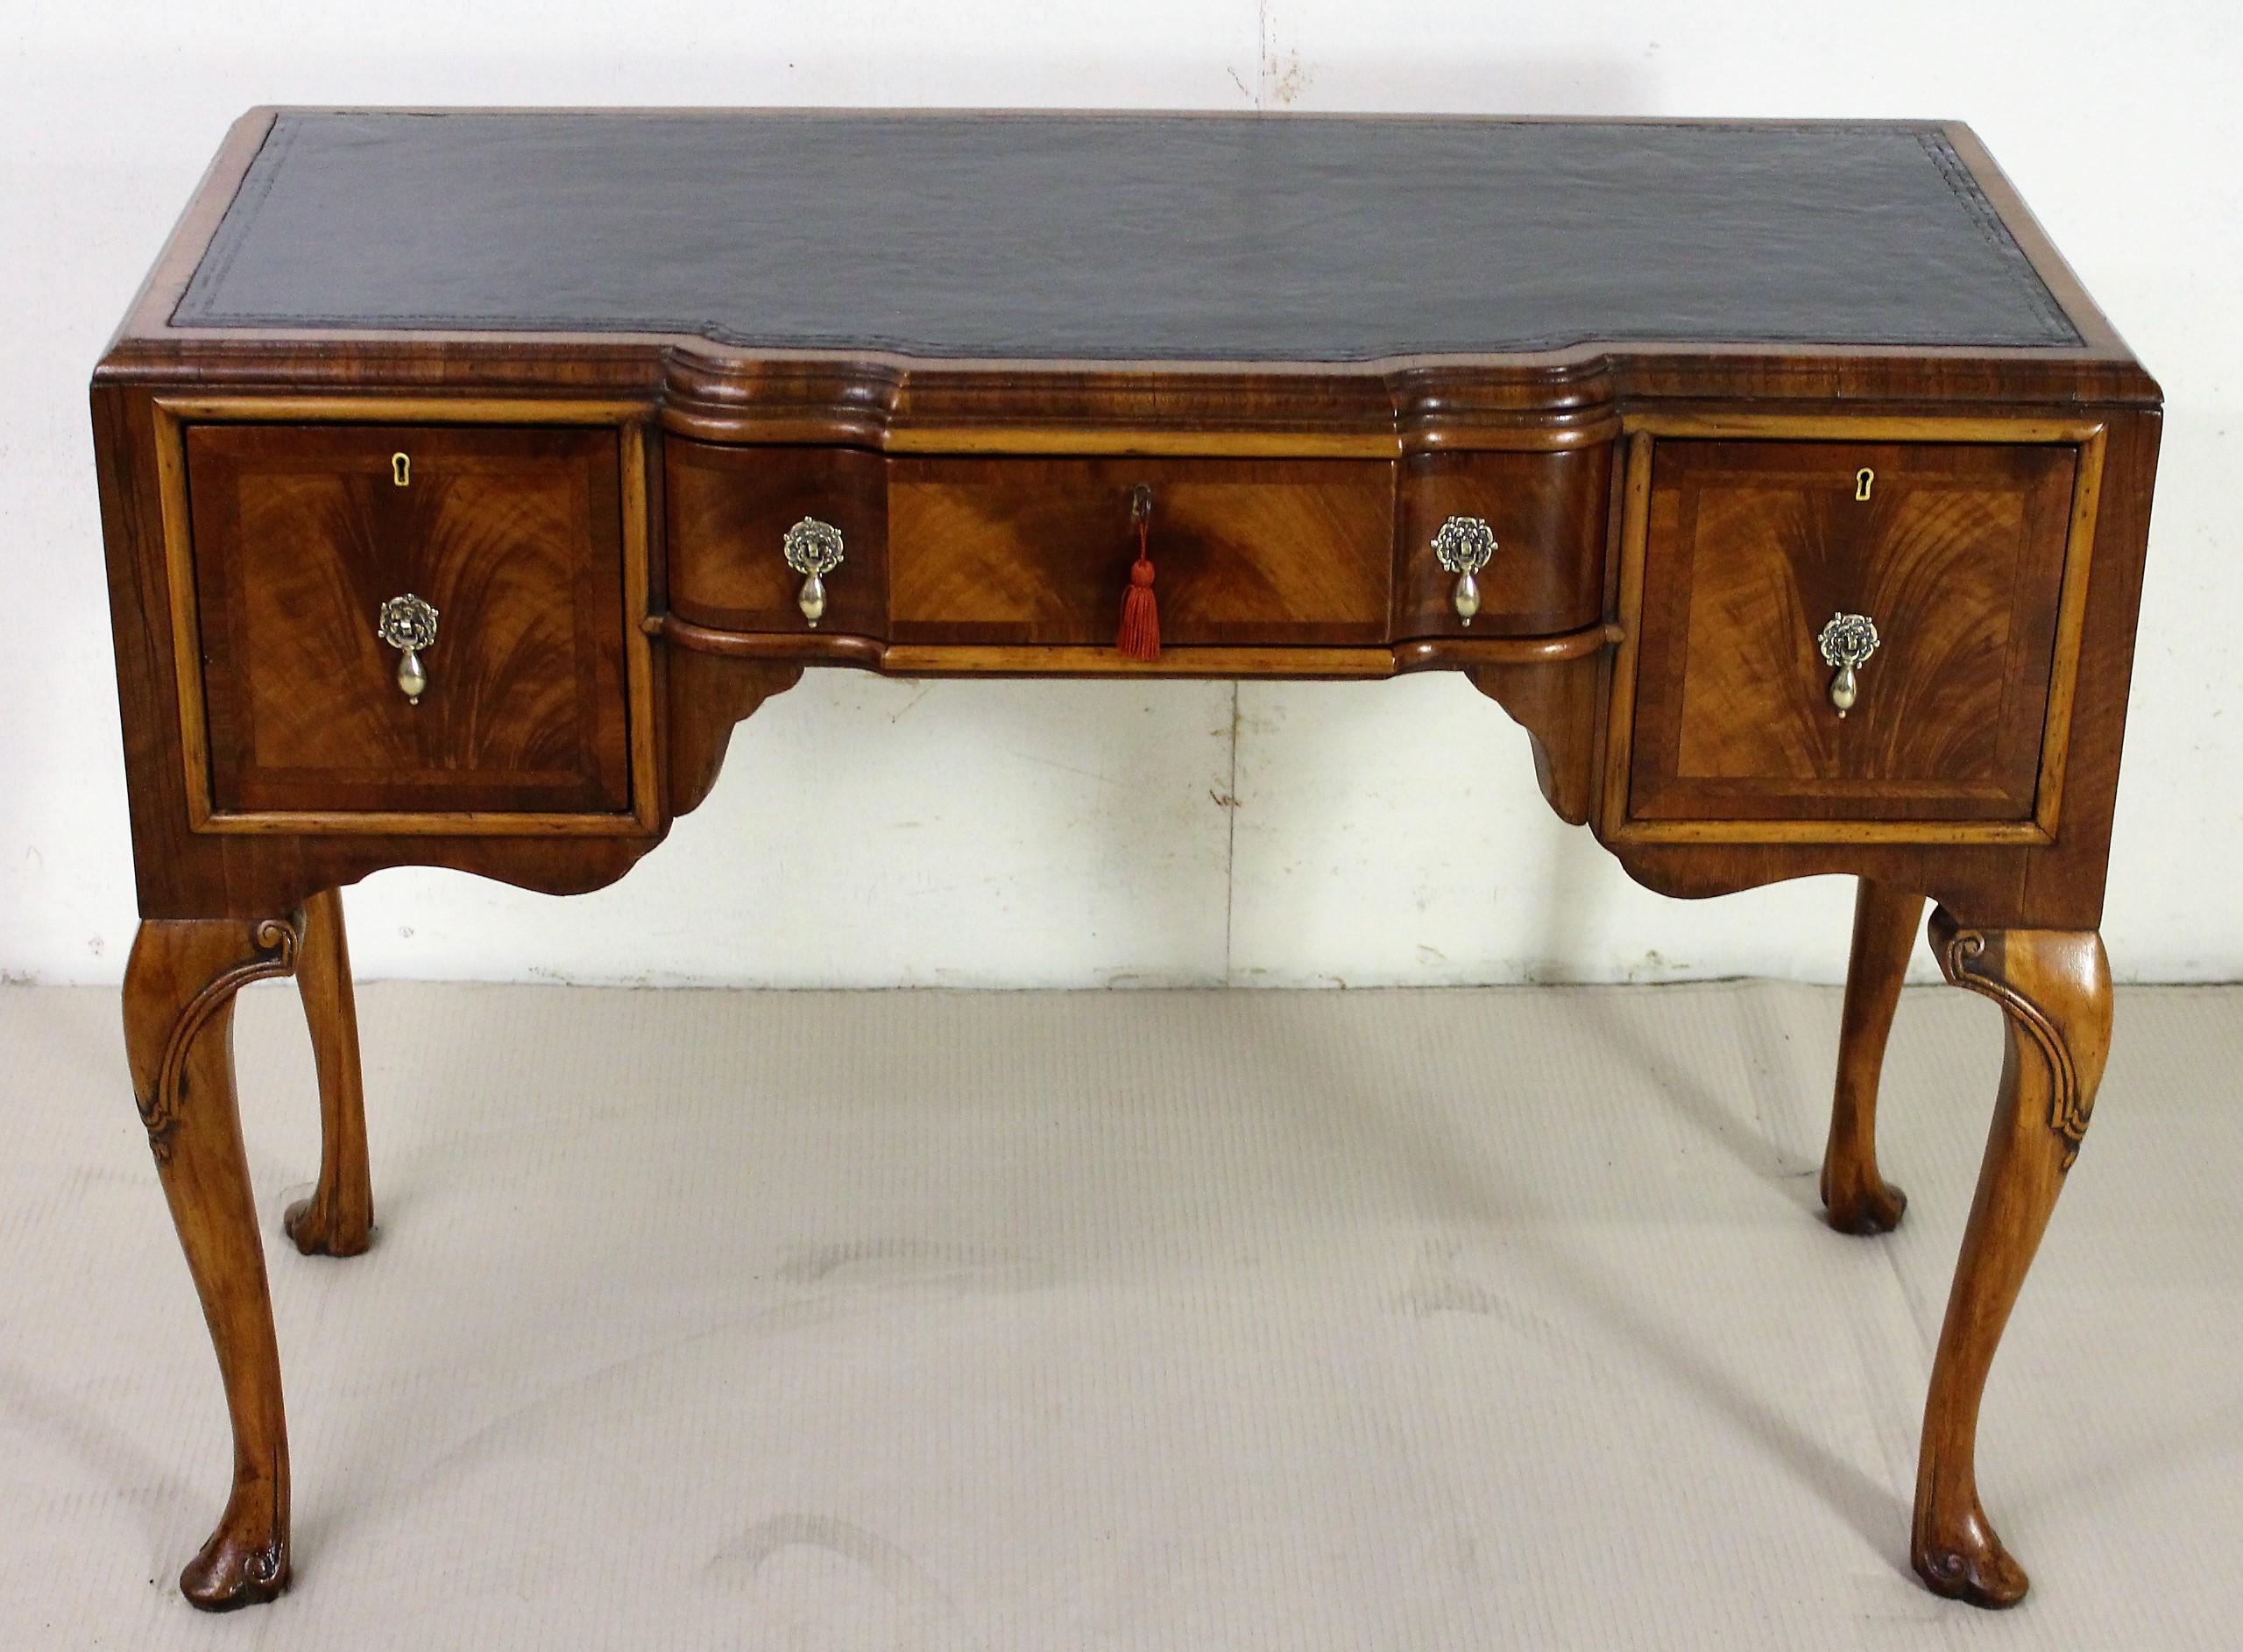 A charming burr walnut writing table in the Queen Anne style. Well constructed in solid walnut with attractive burr walnut veneers. The top fitted with a sumptuous black leather writing surface with blind tooled detailing to the edges. There is an